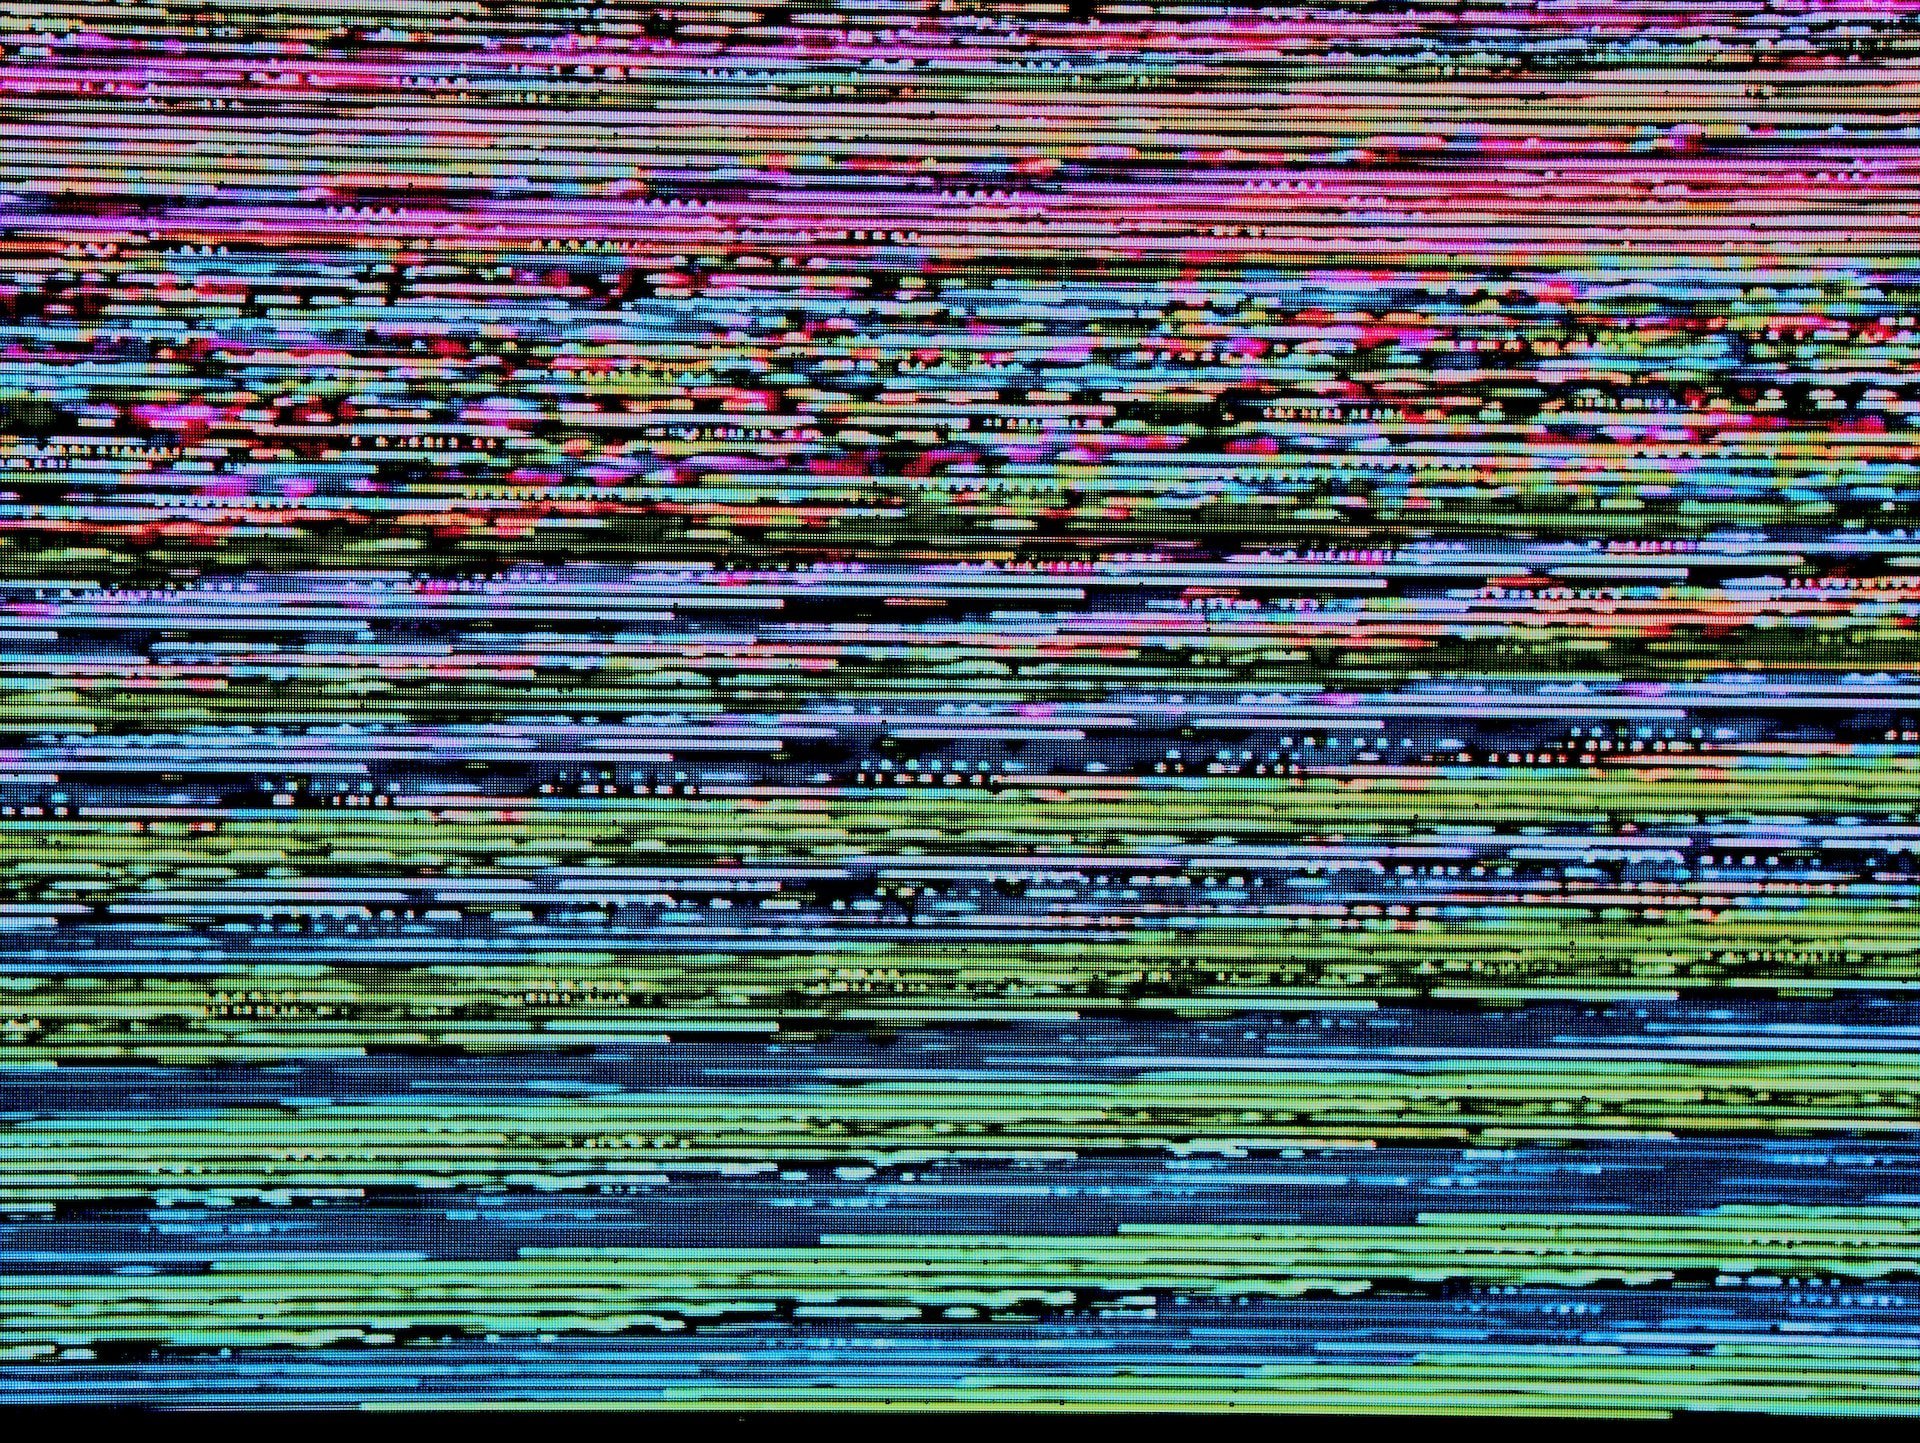 Depicts an abstract line pattern, representing a technical glitch. Used as a cover image for a news article discussing Here's Q1 payments being delayed for their vacation rental offerings.